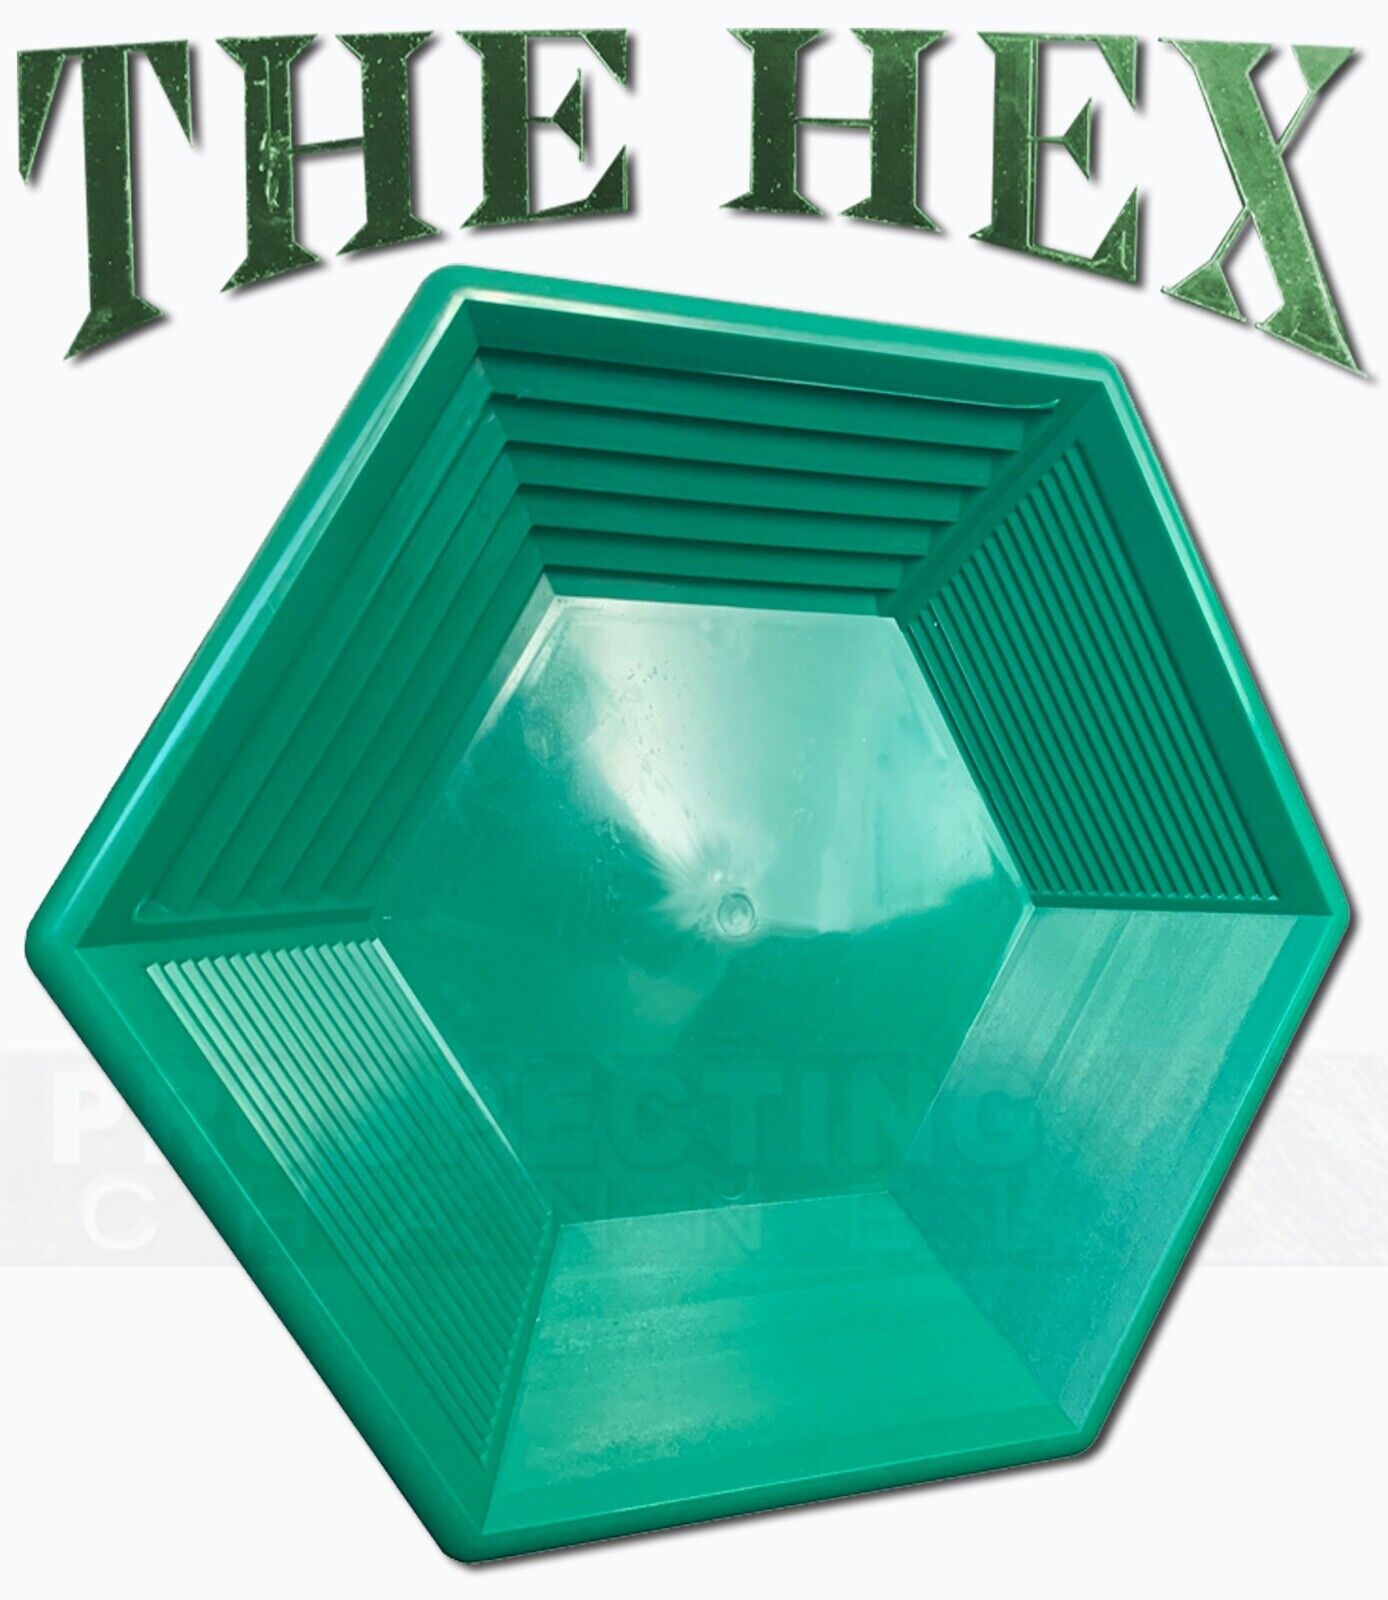 THE HEX GOLD PAN GREEN new